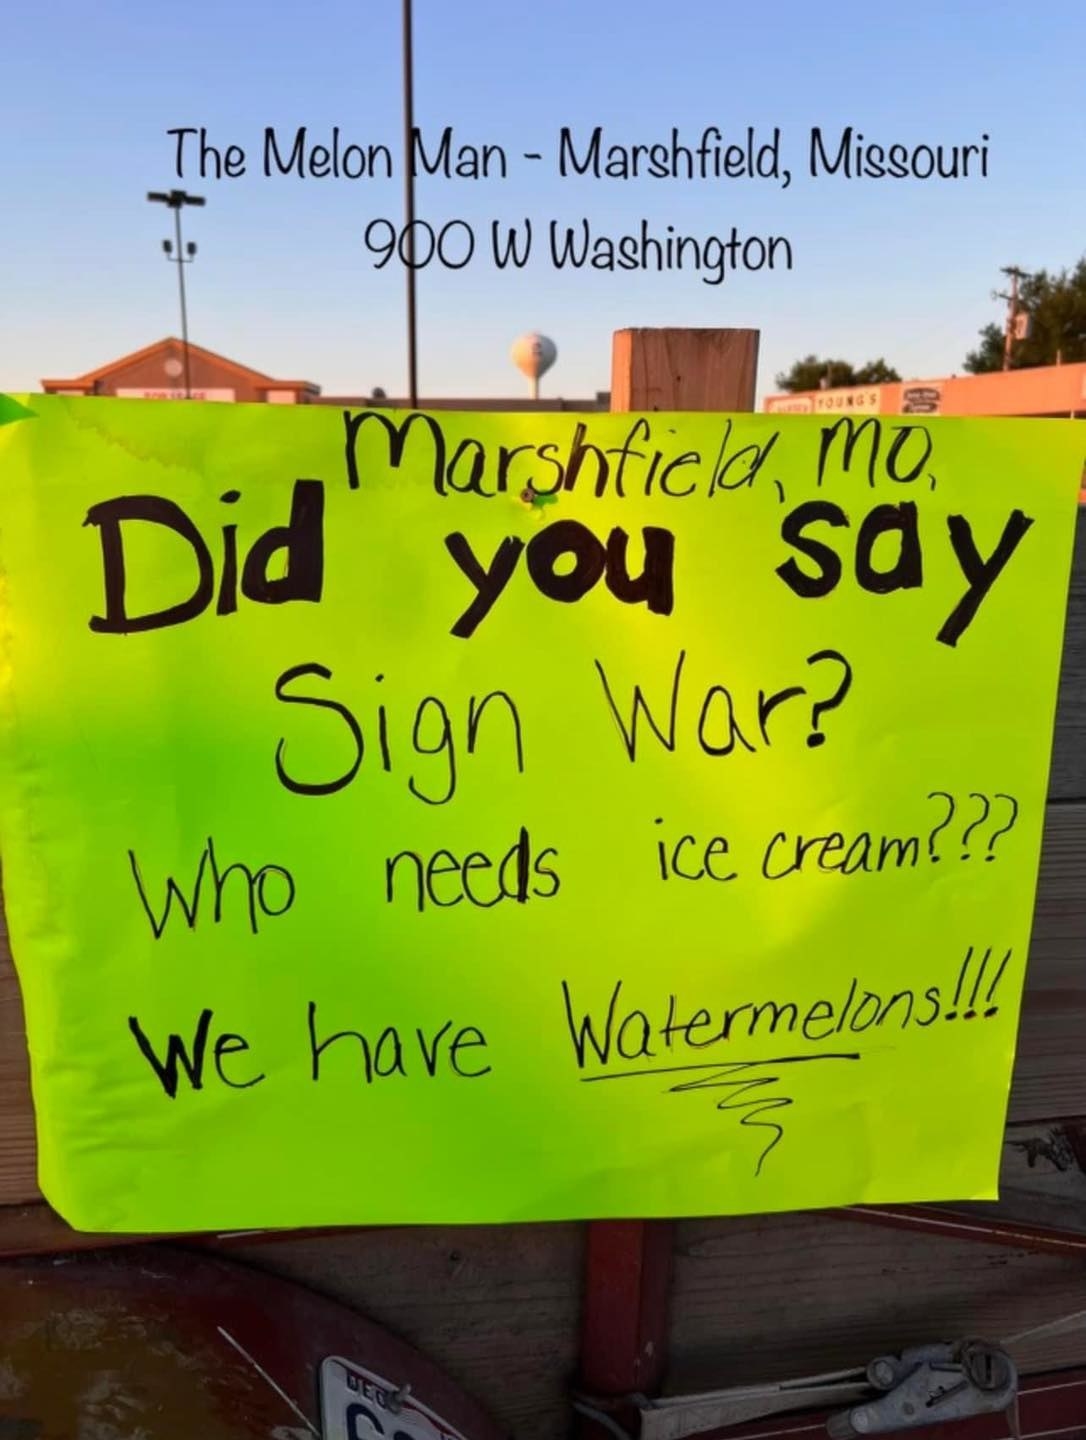 A handwritten sign says &quot;Did you say sign war? Who needs ice cream? We have watermelons&quot;